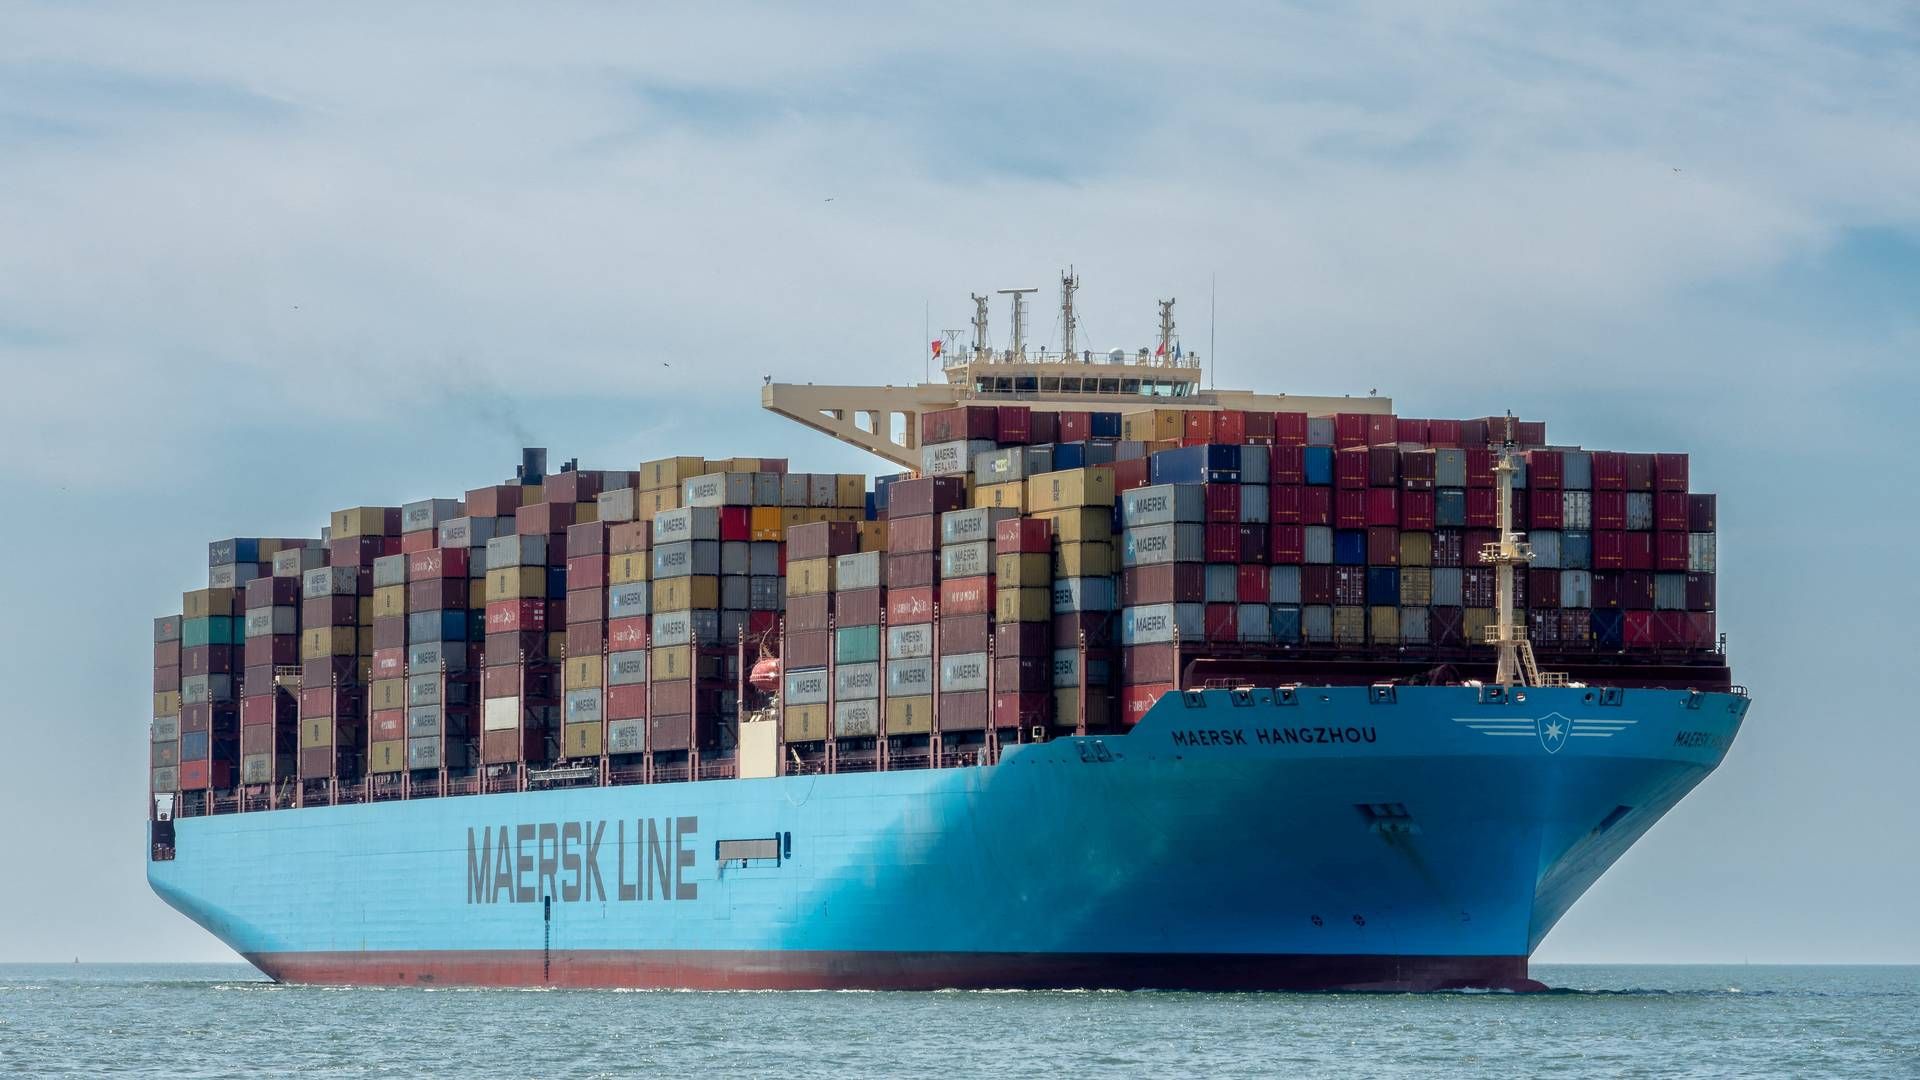 Maersk’s container business lost money in the third quarter (ebit result was negative by USD 27m), and this has continued in the fourth quarter with a loss of USD 0.9bn, Sydbank estimates.